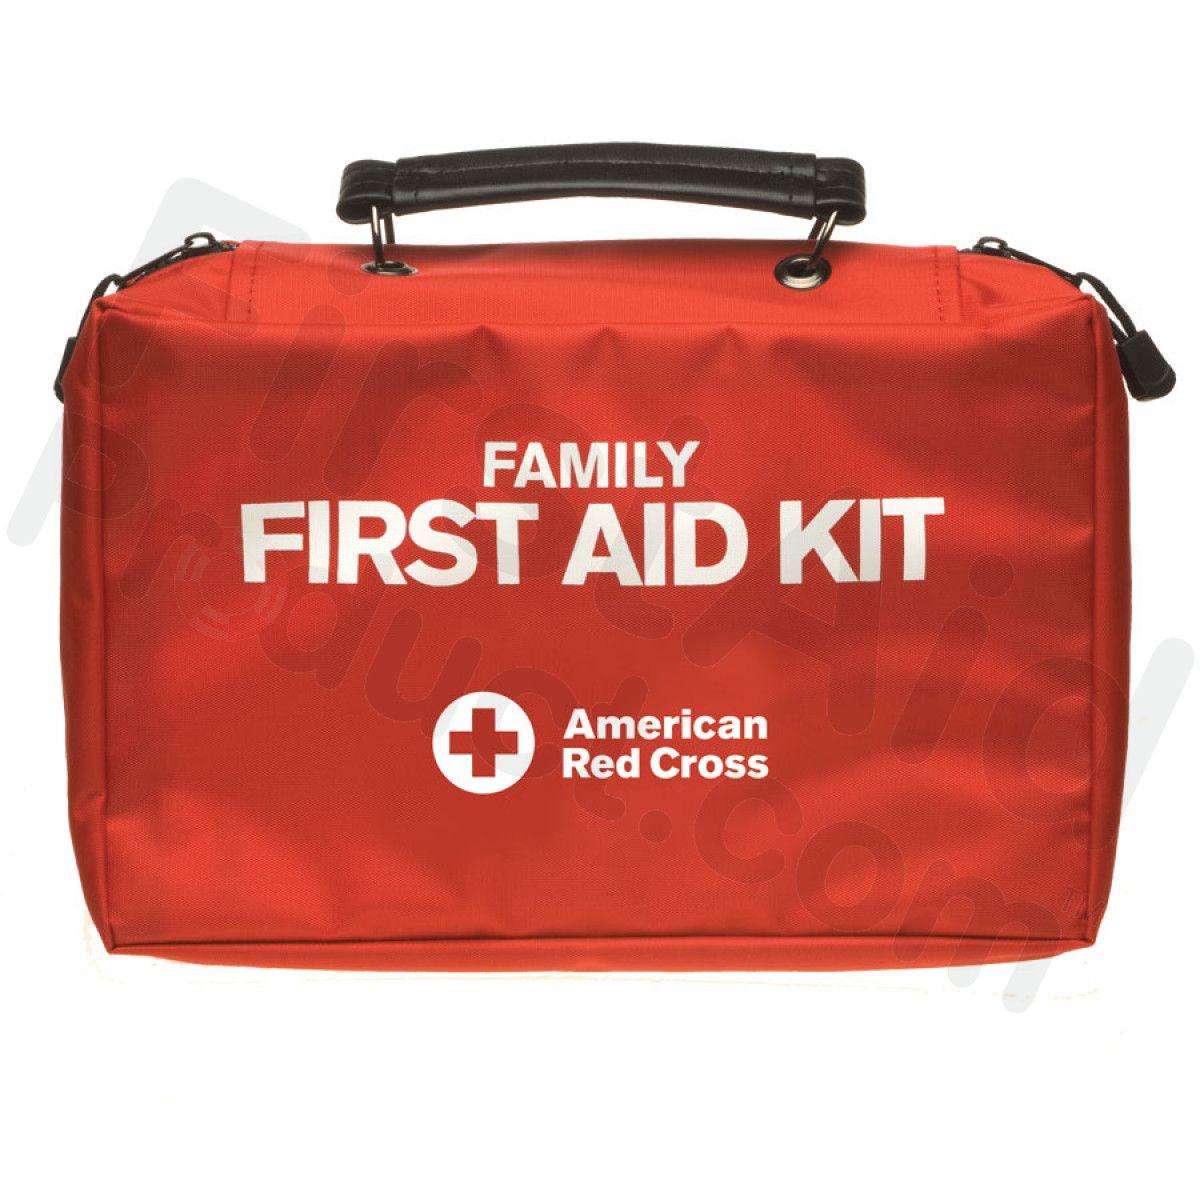 Large American Red Cross Logo - First Aid Product.com: American Red Cross Deluxe Family First Aid